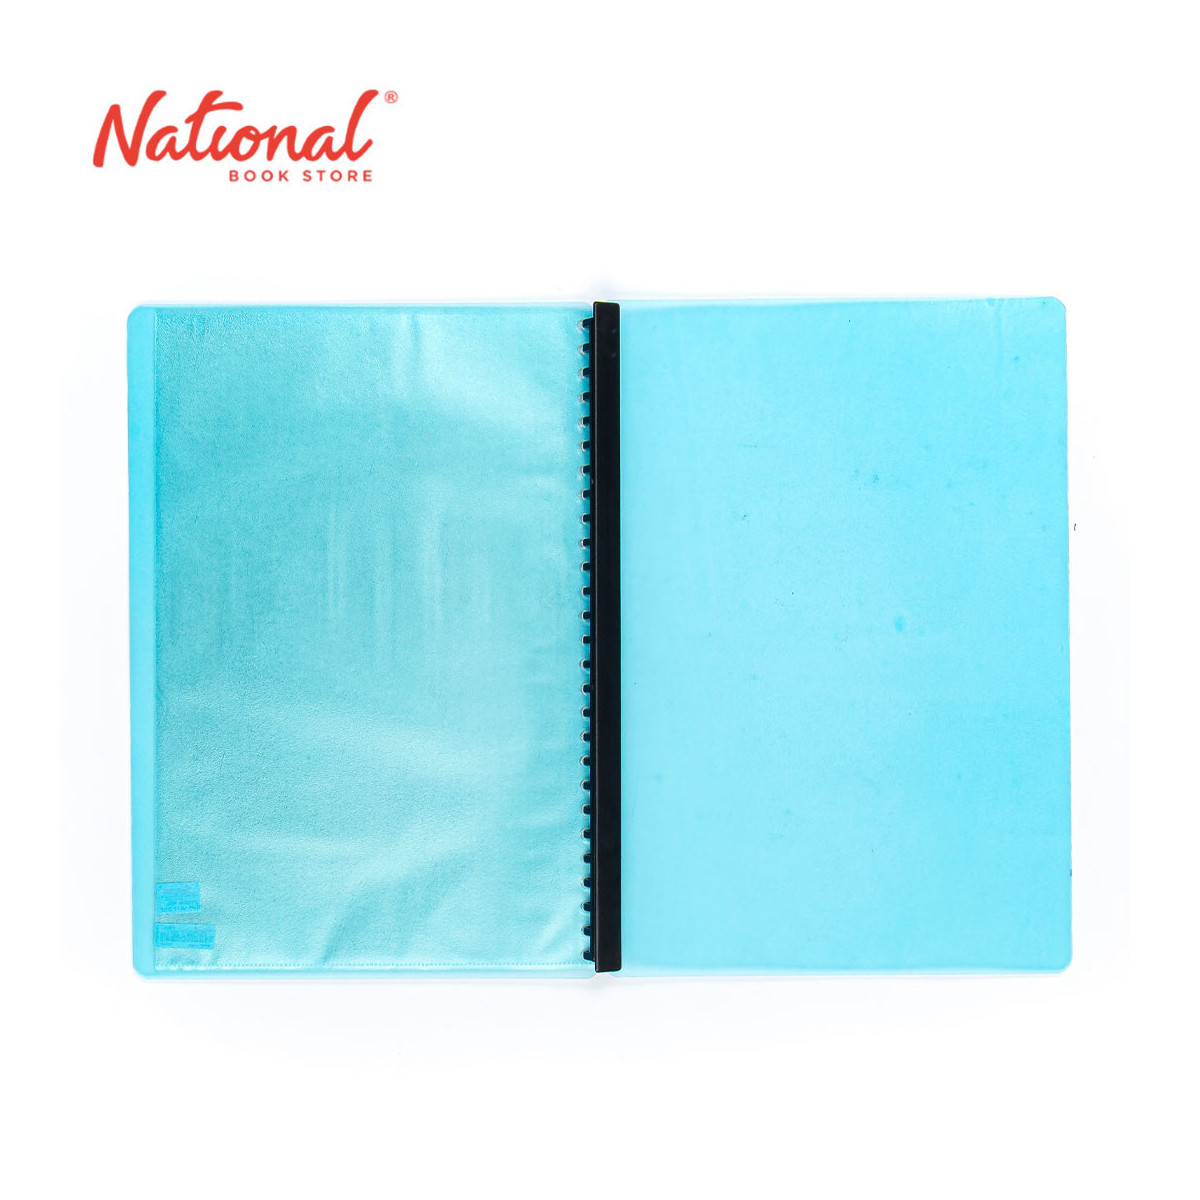 Seagull Clearbook Refillable 9927 Long 20 Sheets 27 Holes Transparent Cover Diagonal Lines Blue